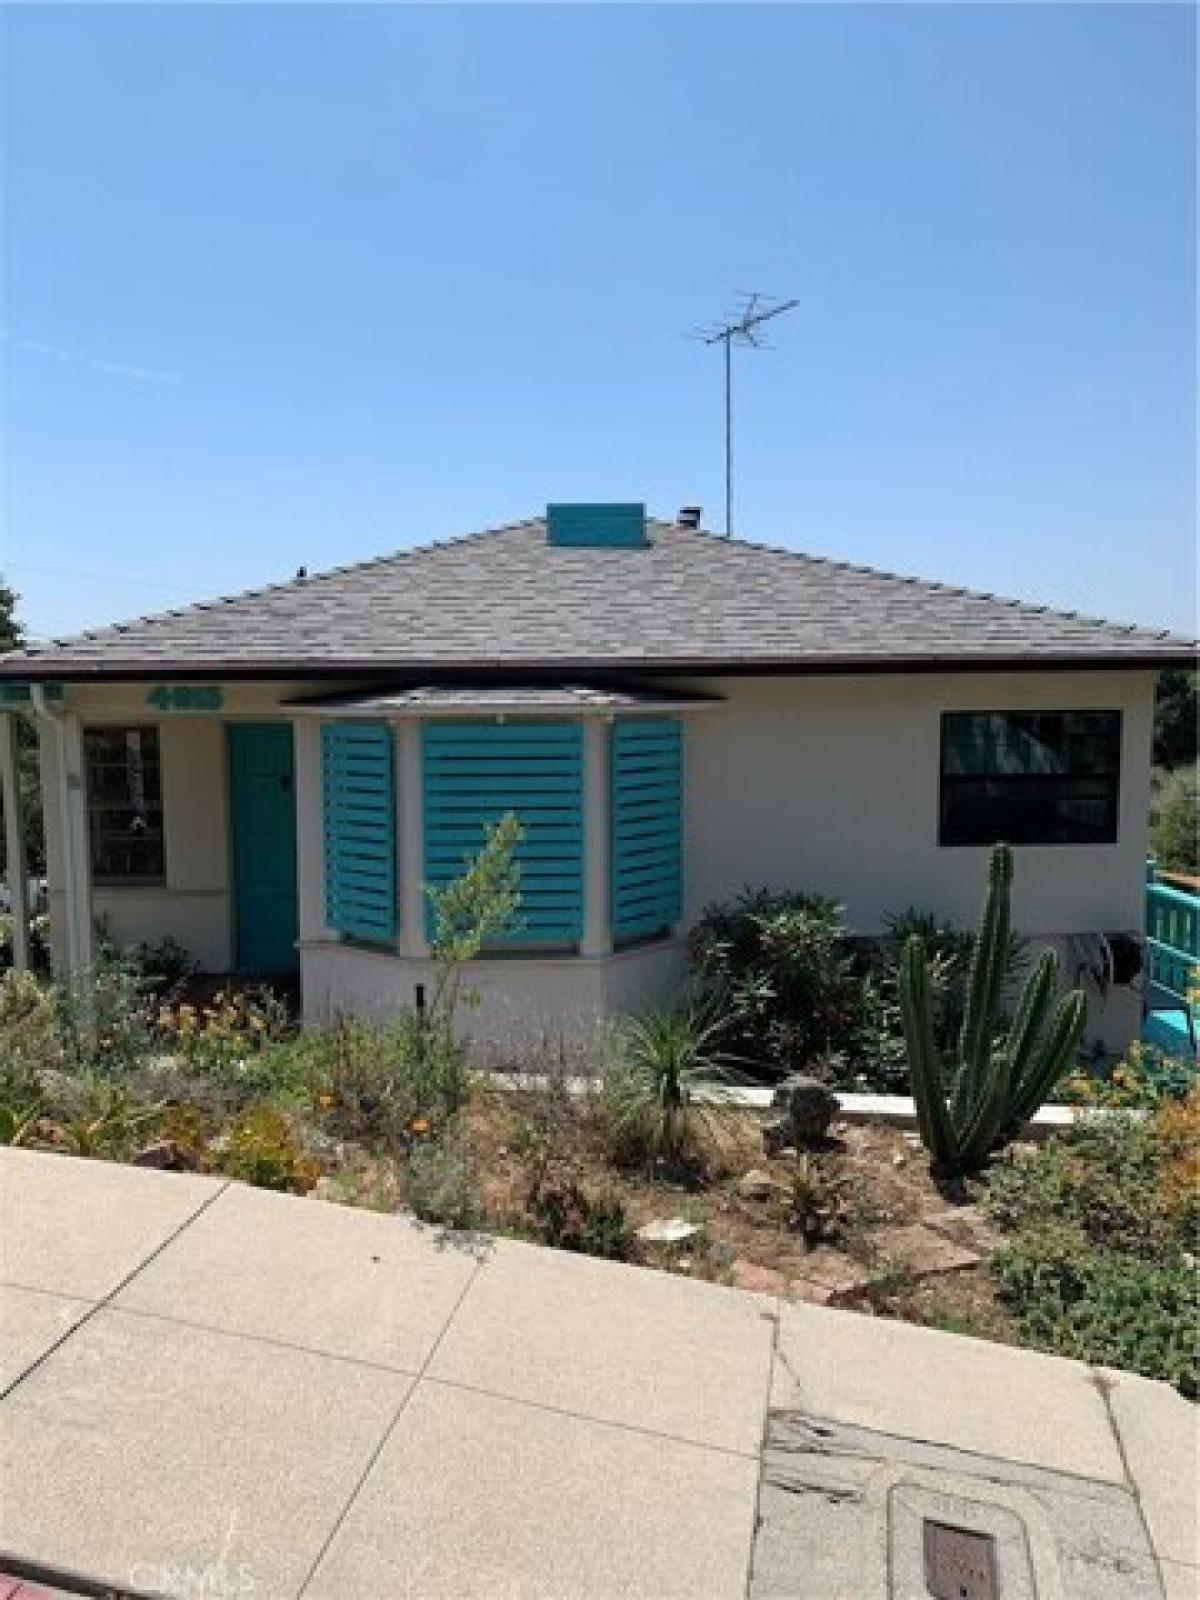 Picture of Home For Rent in Los Angeles, California, United States